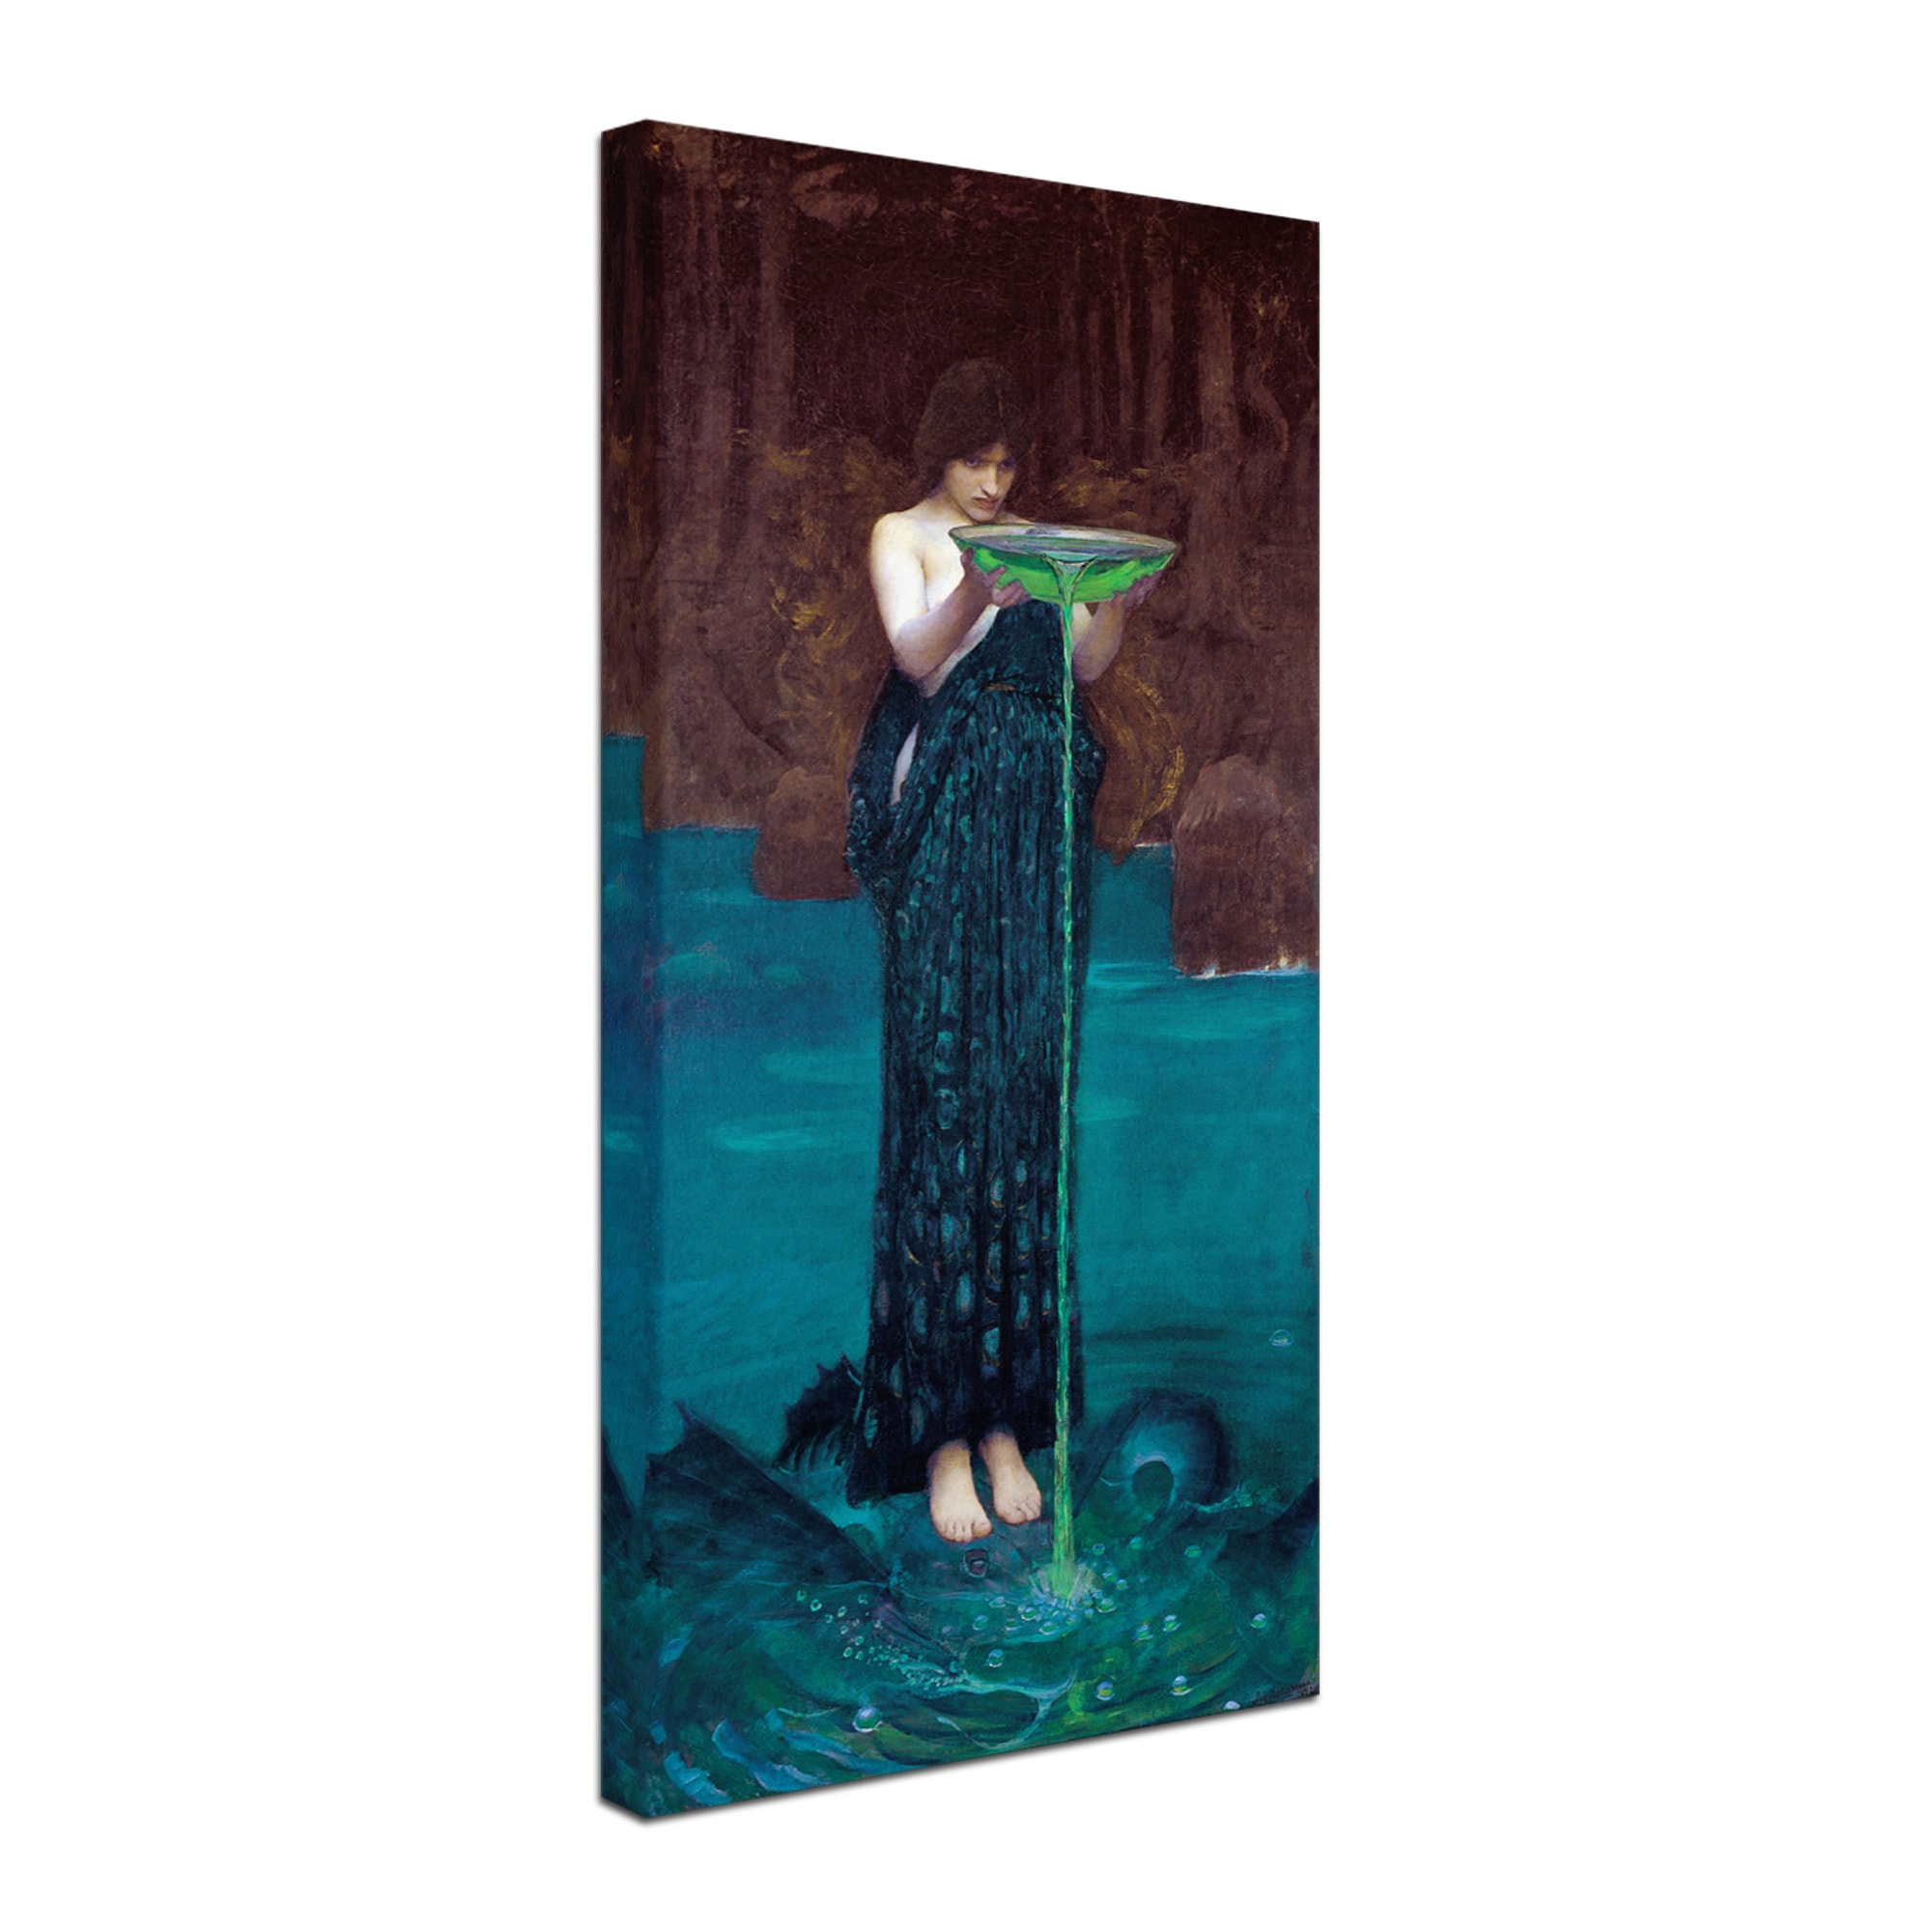 Details about   J W Waterhouse Circe Invidiosa Canvas Wall Art Print Poster with Hanger 24x12 